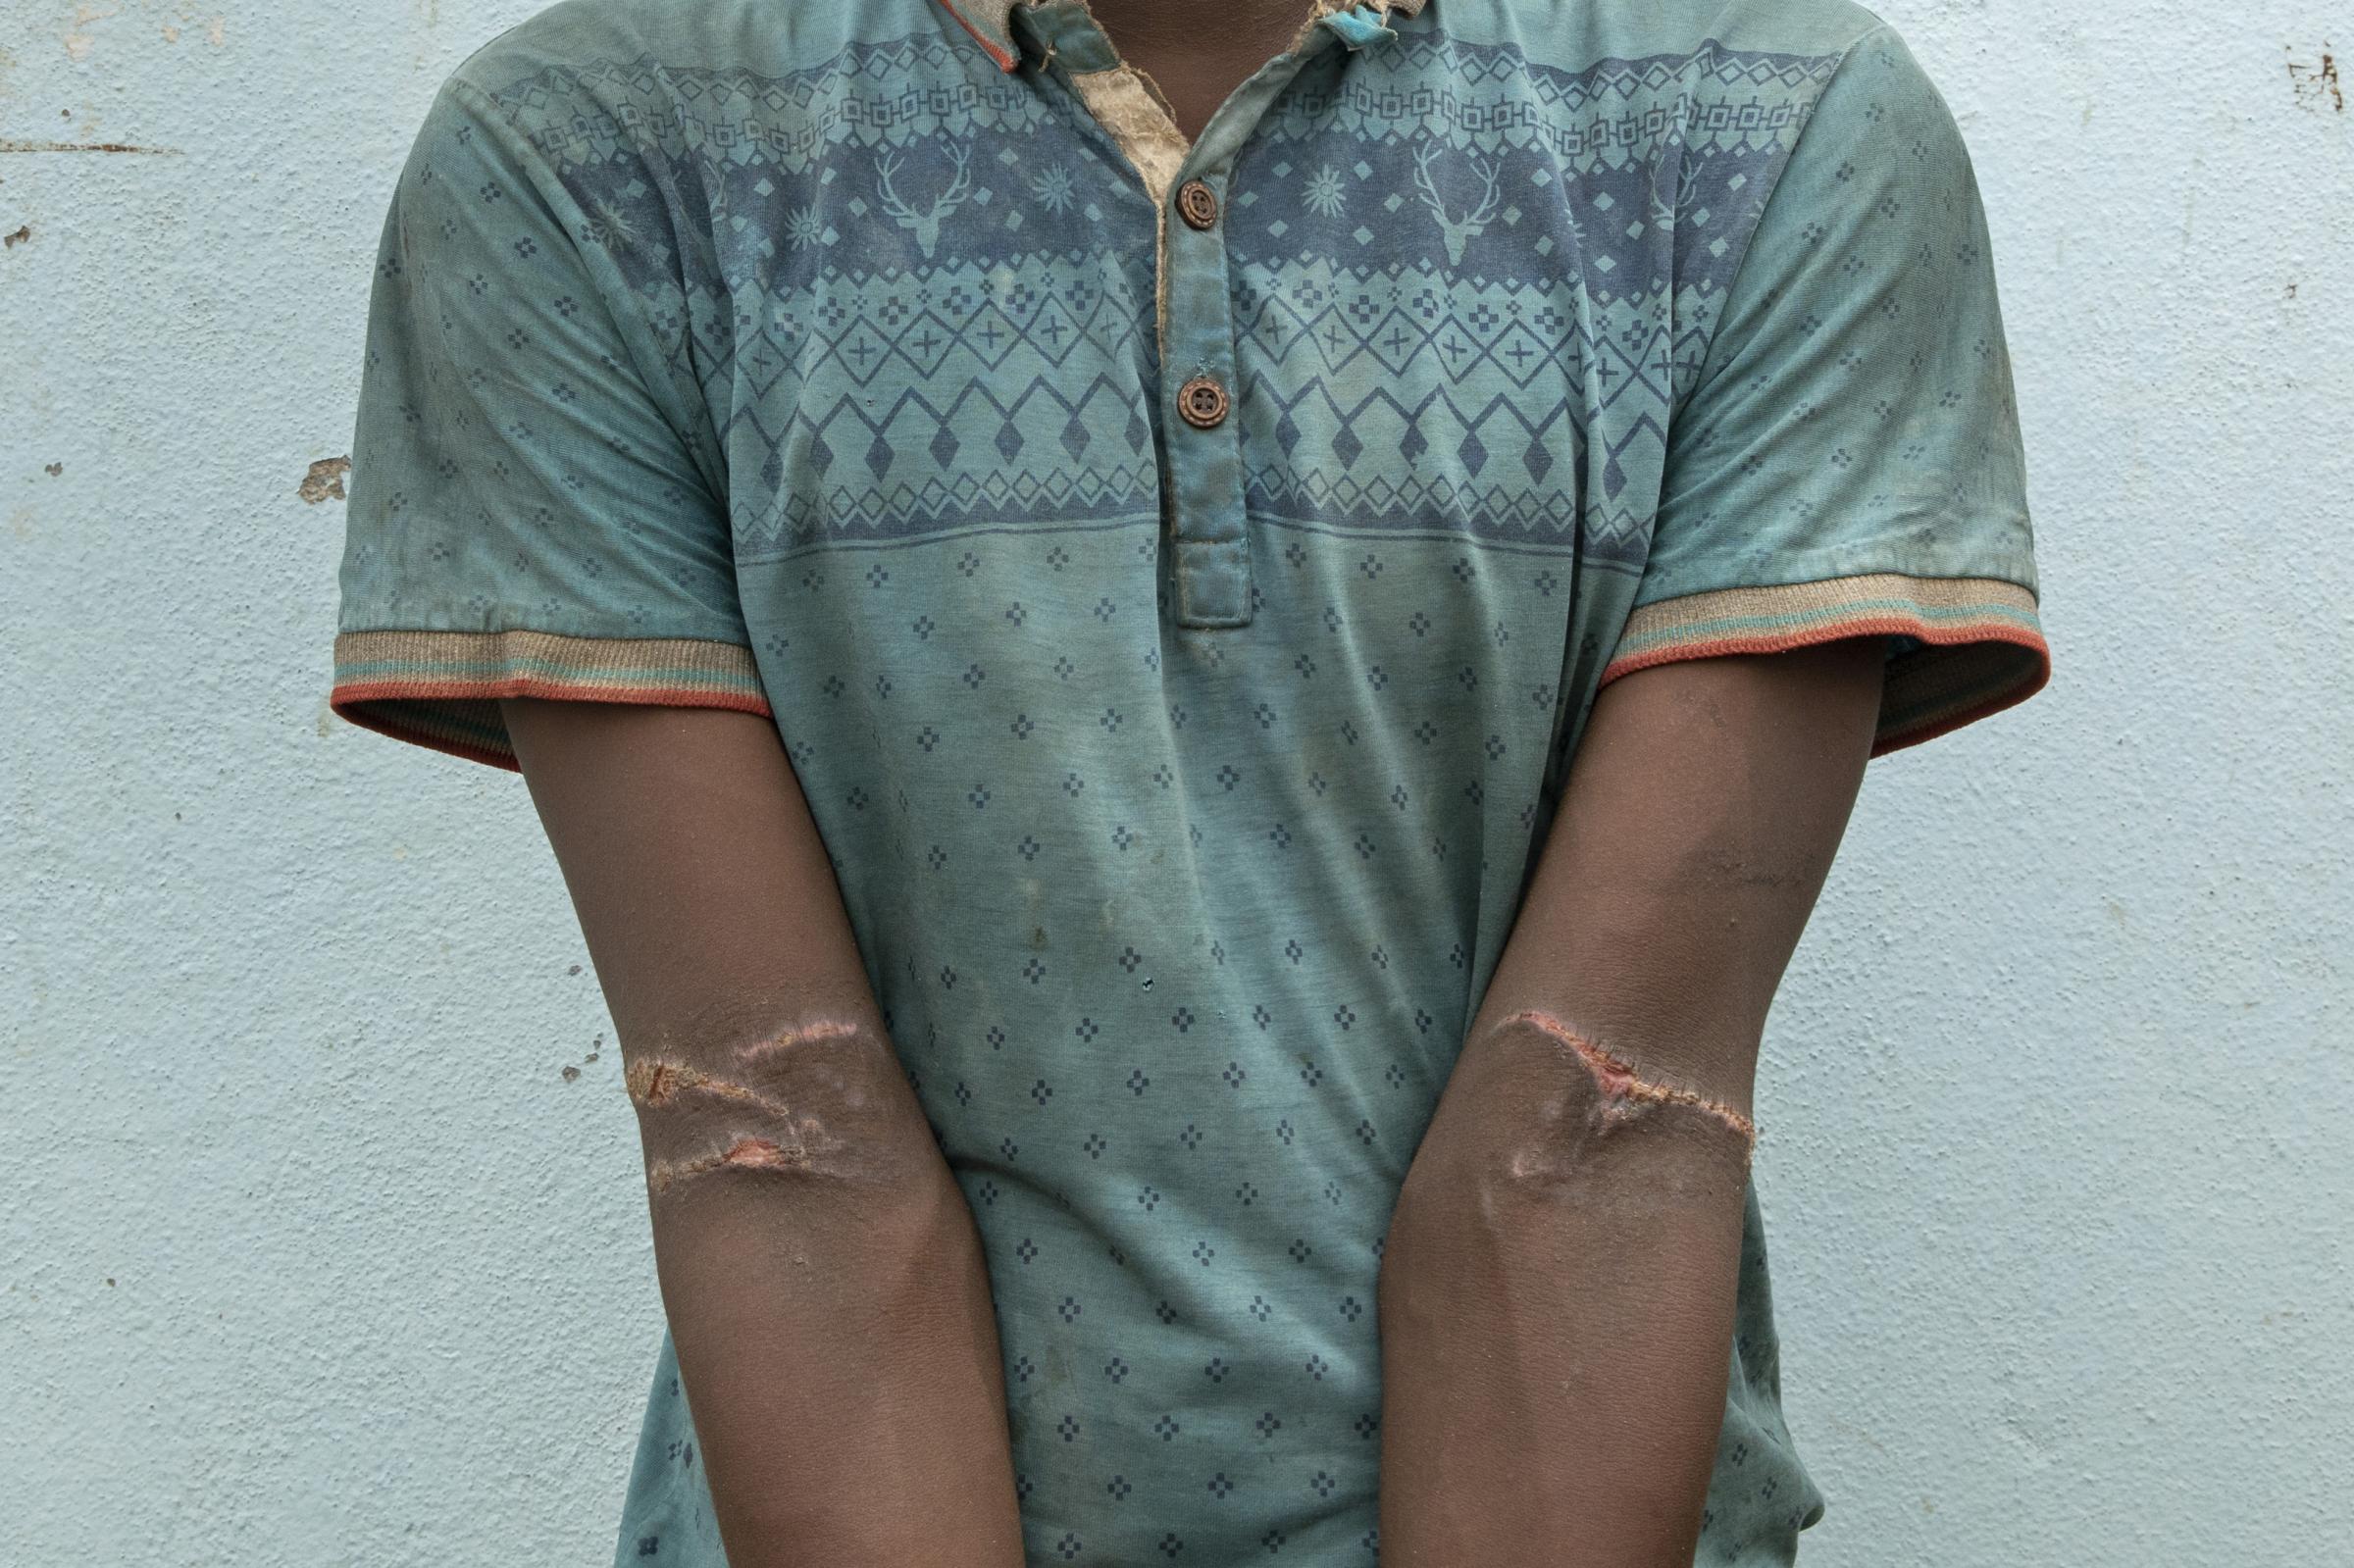  Ibrahim Bakalah Hassan, 24, shows scars from torture in a &quot;hosh&quot; in Lahj, Yemen. He says his arms were tied behind his back, and wants to go back to Ethiopia. 